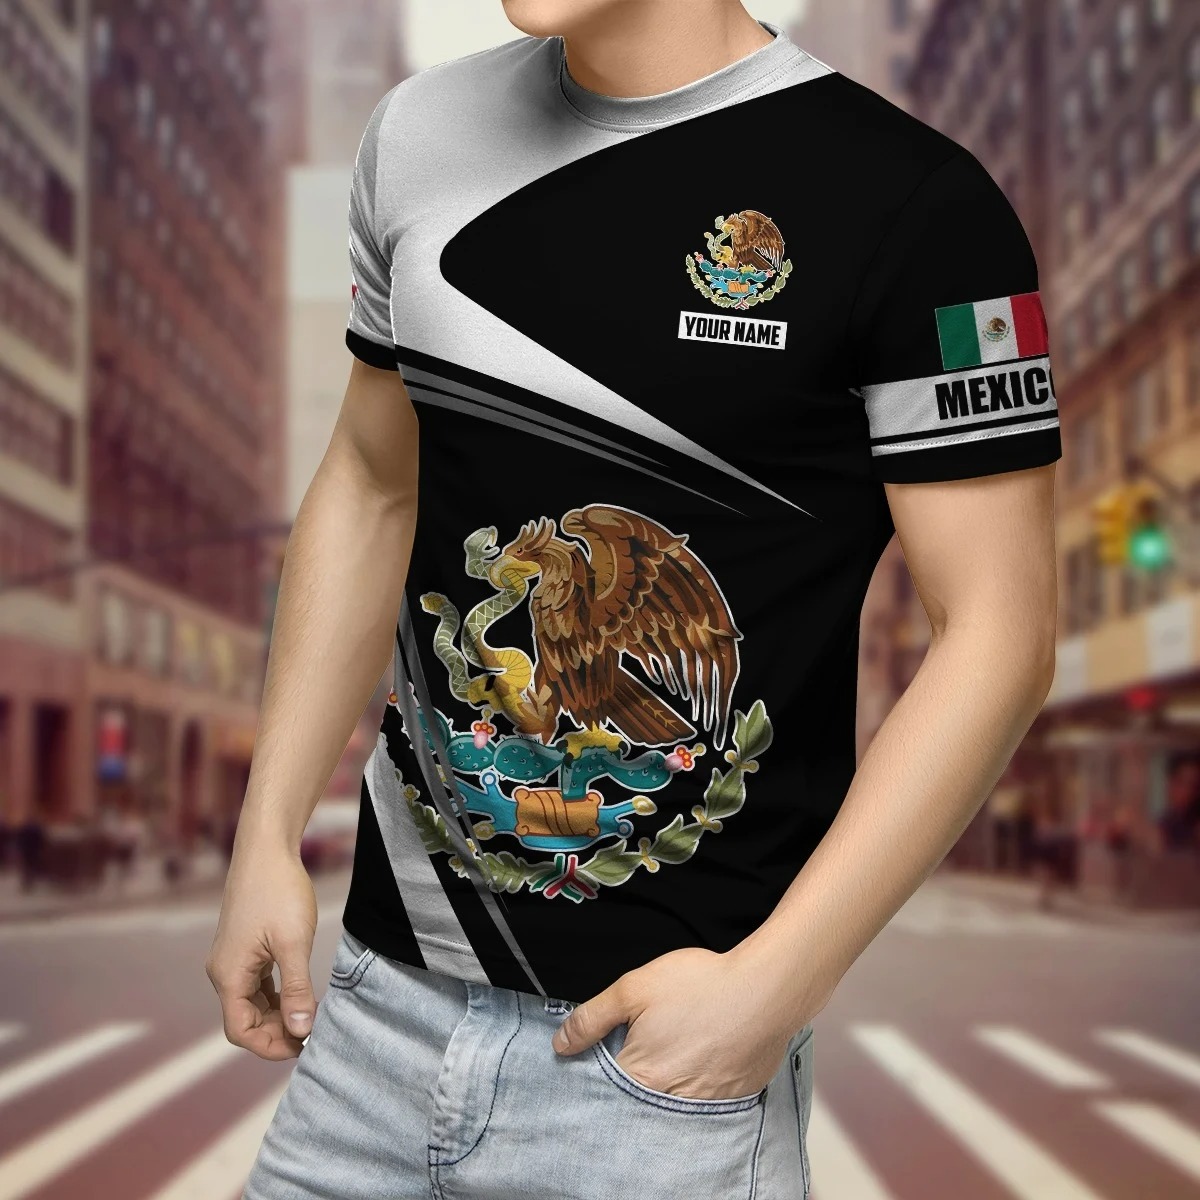 Mexico black white Mexican flag custom personalized 3d shirt, hoodie – LIMITED EDITION